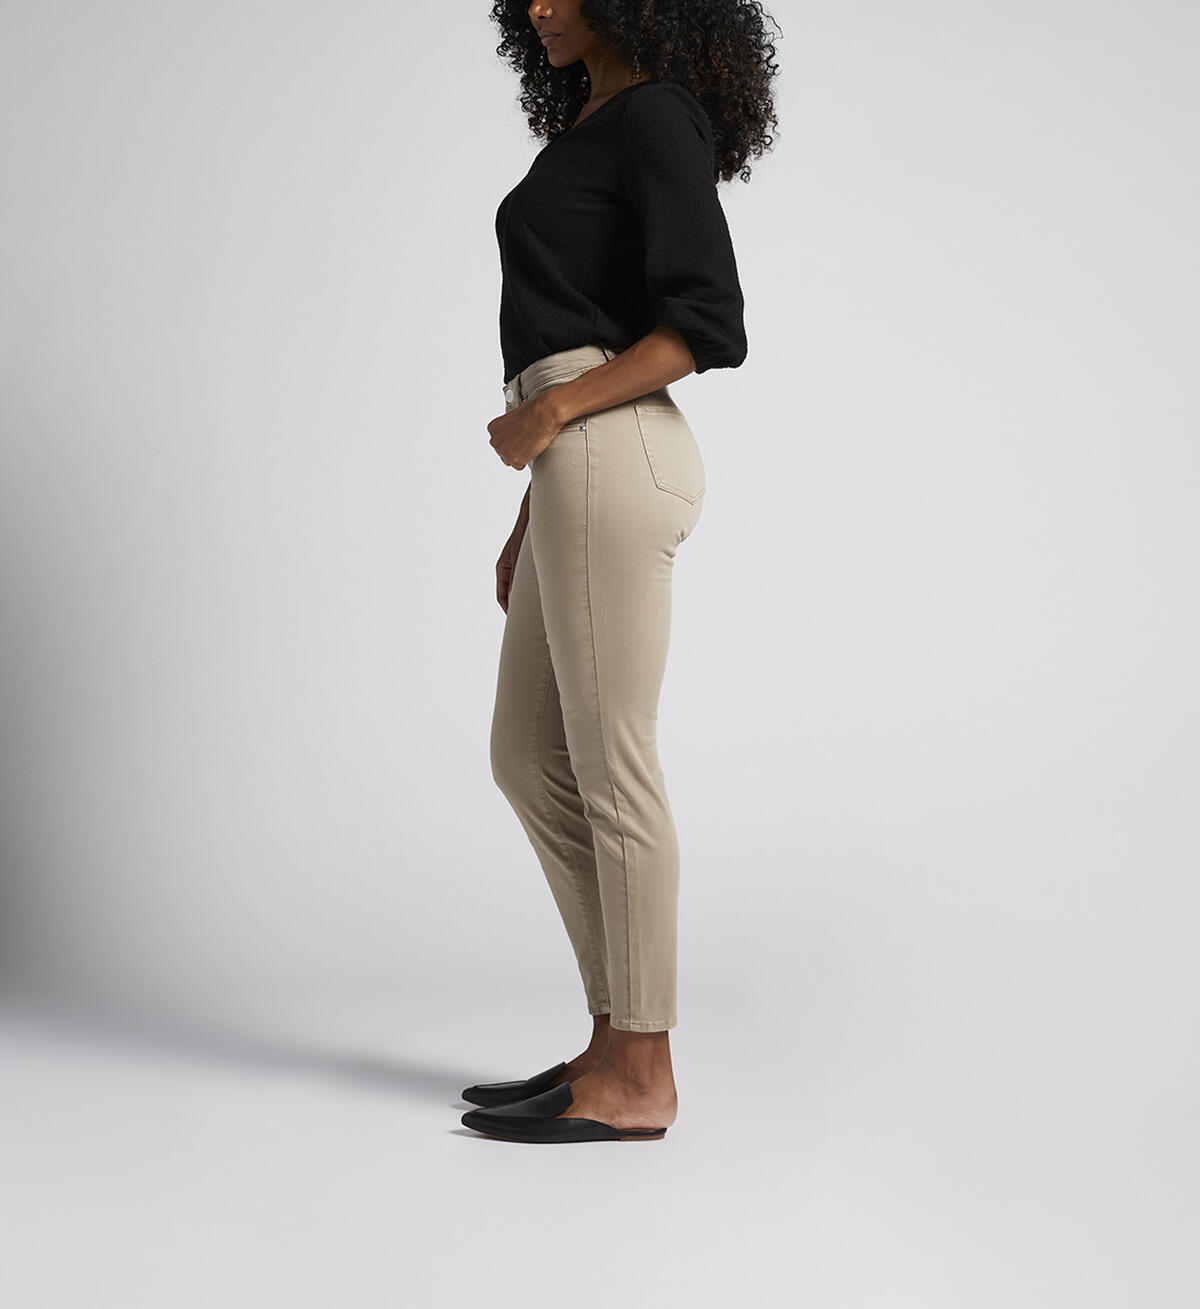 Cecilia Mid Rise Skinny Pants, Taupe, hi-res image number 2